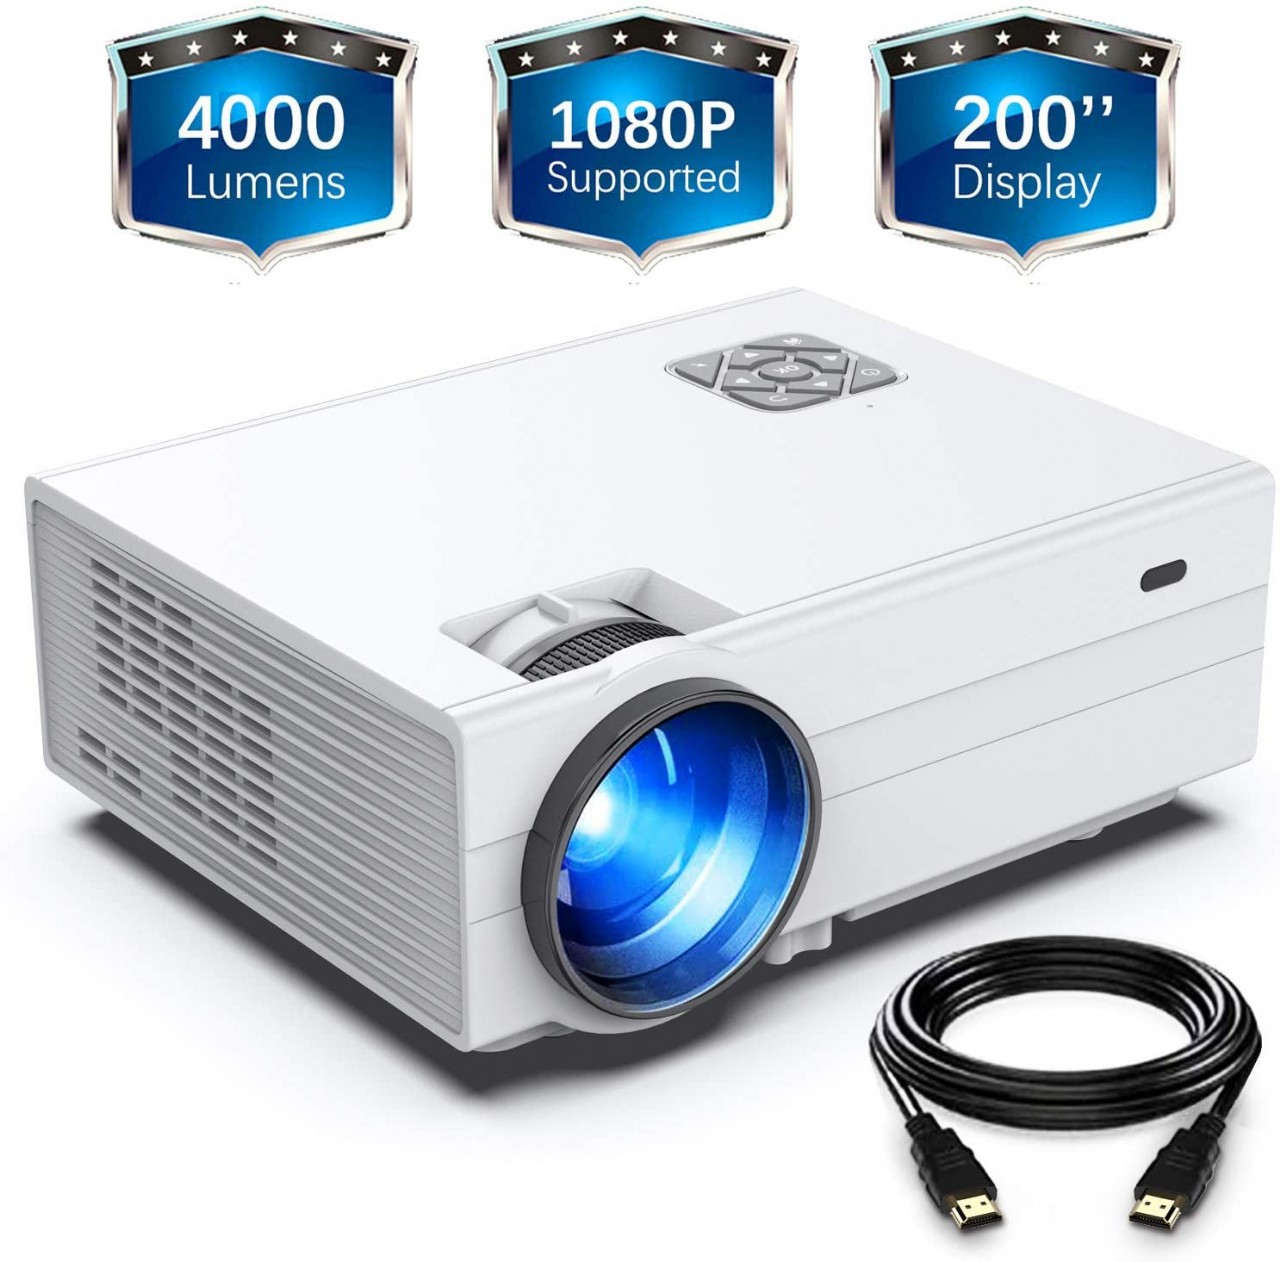 GIMISONIC Projector, HD 4000 Lux Video Projector with 200